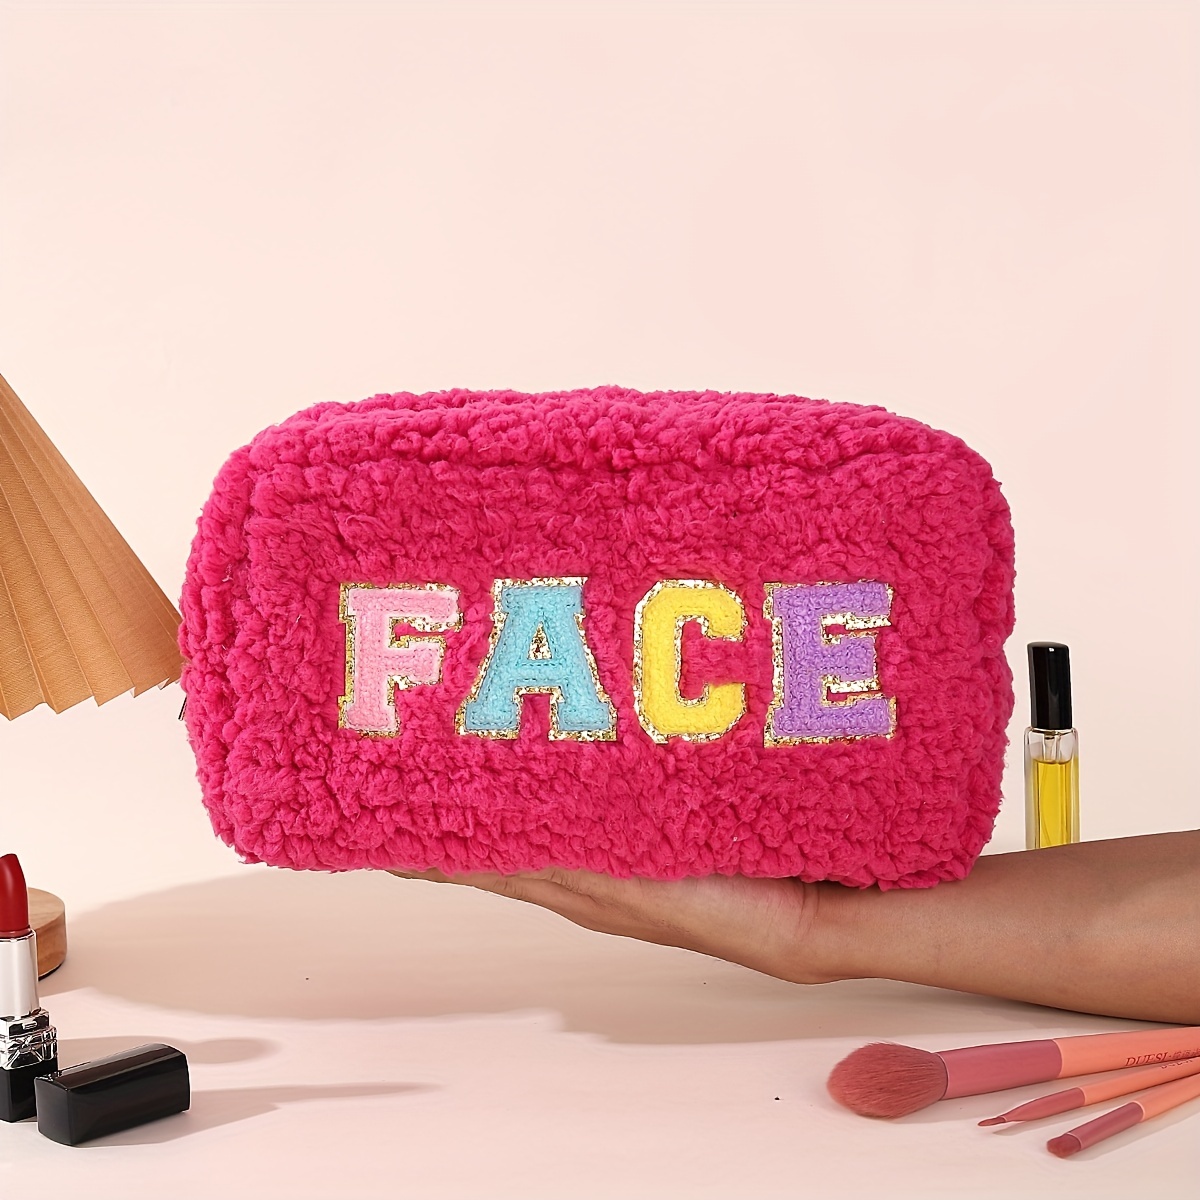 Preppy Fluffy Cosmetic Storage Pouch Chenille Letter Makeup